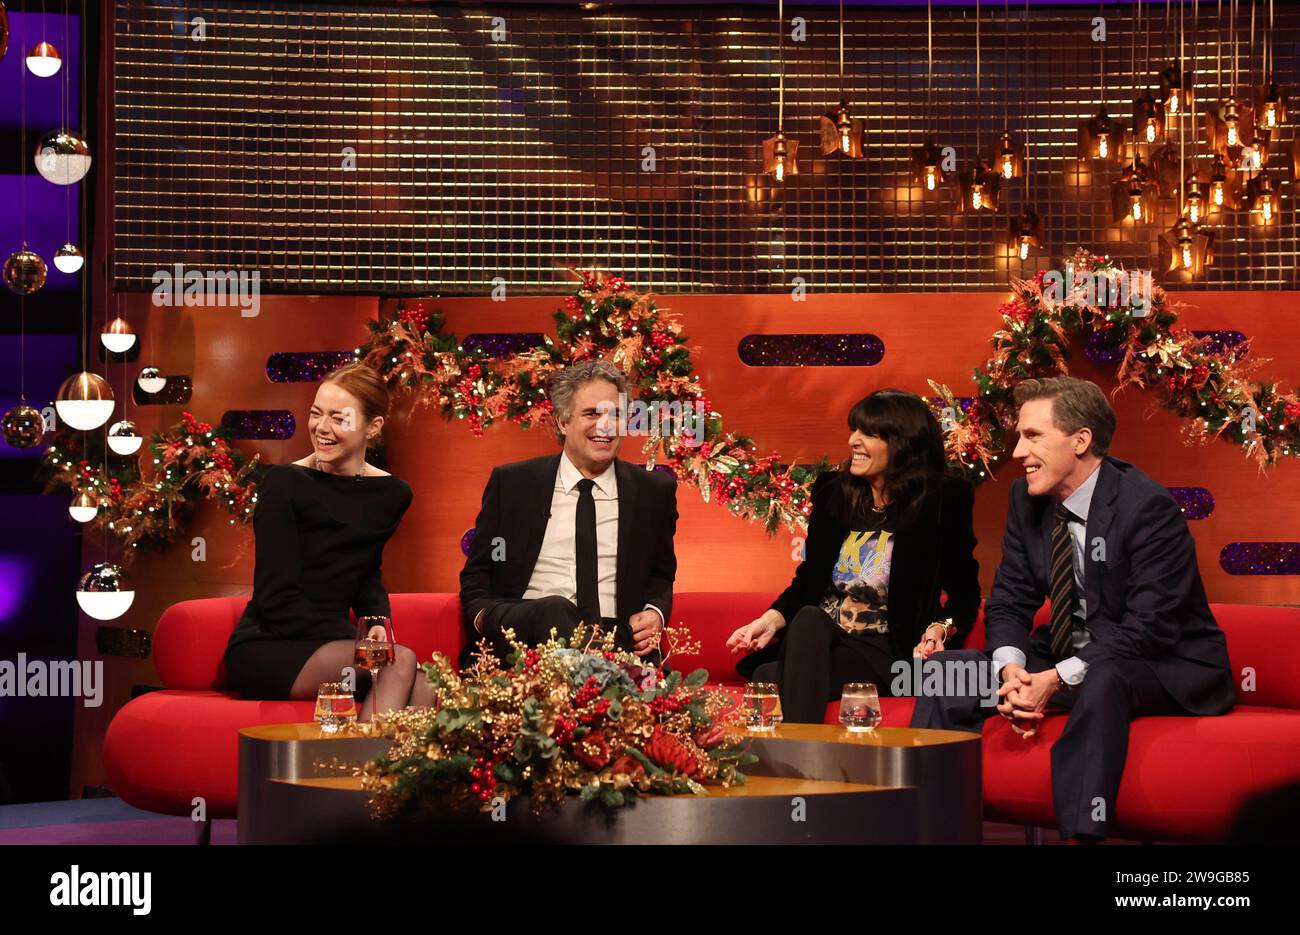 EDITORIAL USE ONLY Emma Stone, Mark Ruffalo, Claudia Winkleman, and Rob Brydon during the filming for the Graham Norton Show at BBC Studioworks 6 Television Centre, Wood Lane, London, to be aired on BBC One on Sunday evening. Picture date: Wednesday December 13, 2023. Photo credit: Isabel Infantes/PA Wire Stock Photo